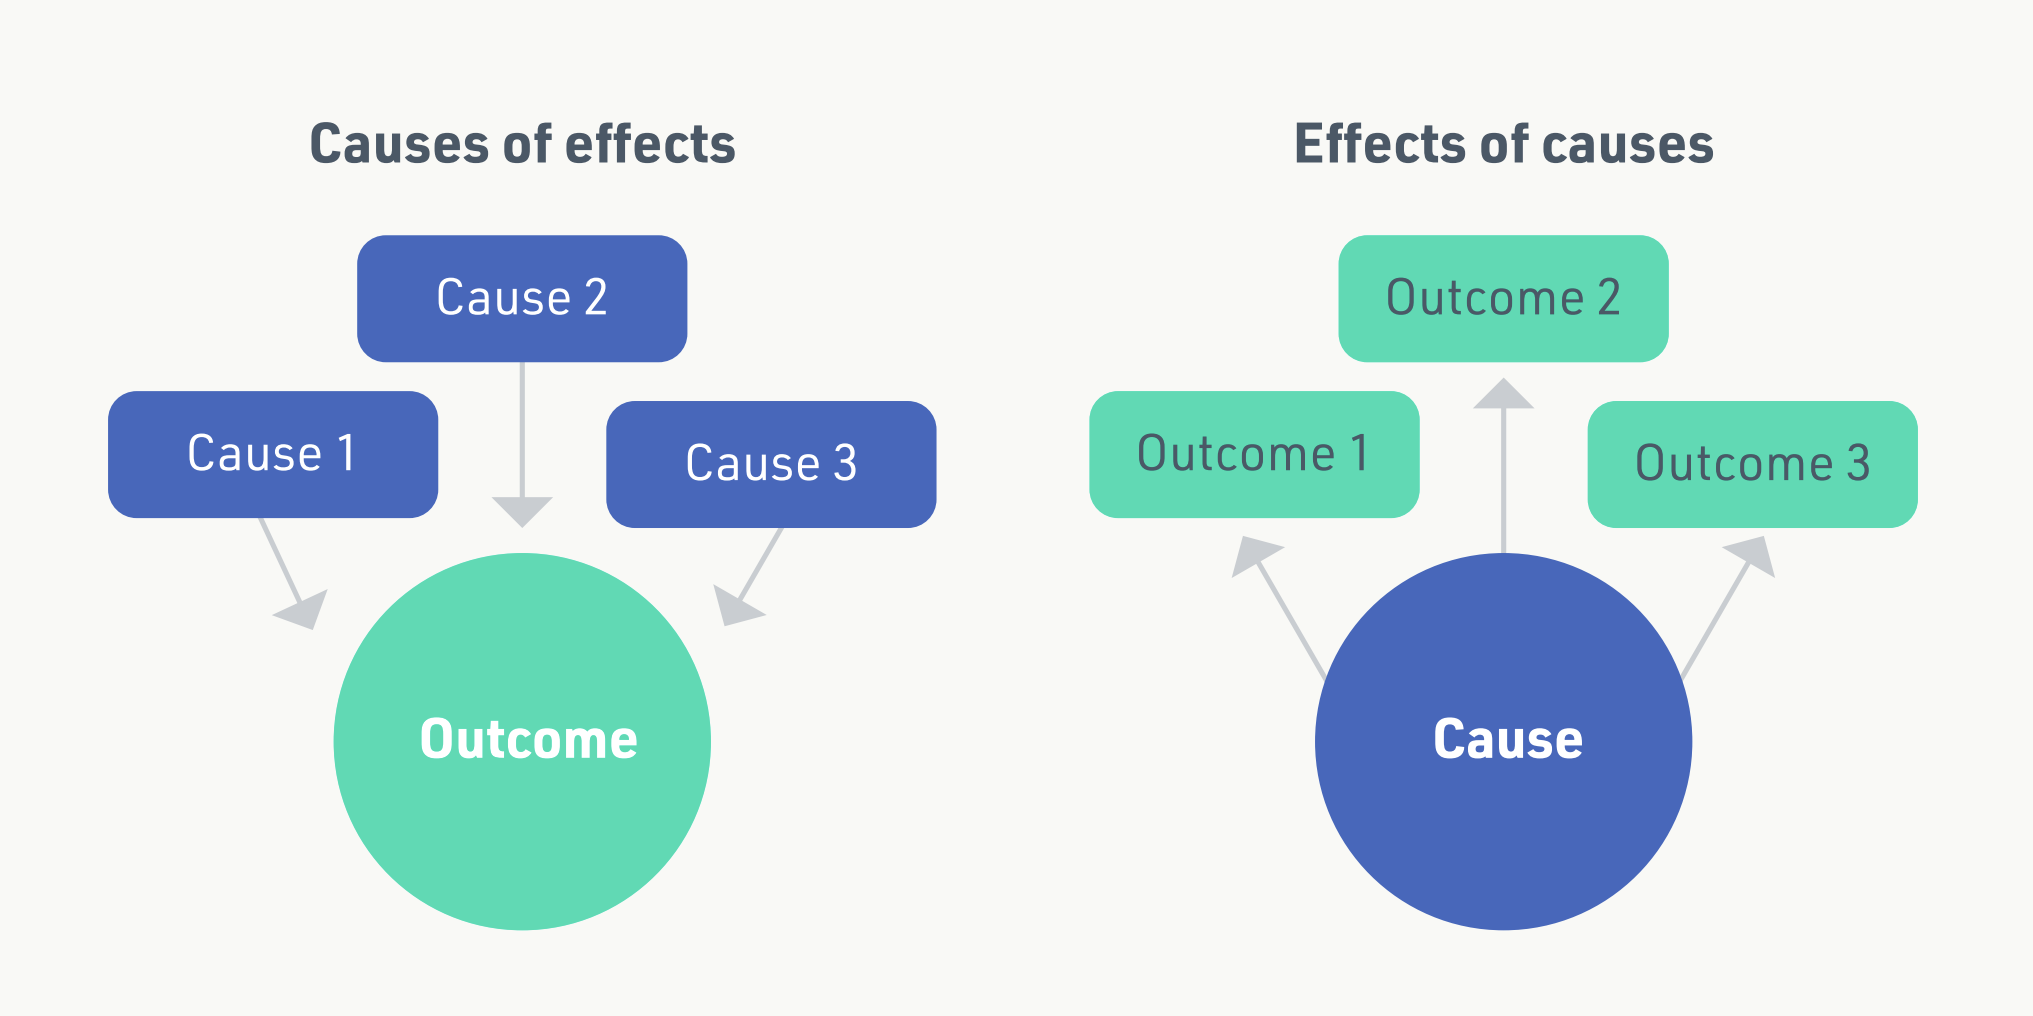 types of cause and effect